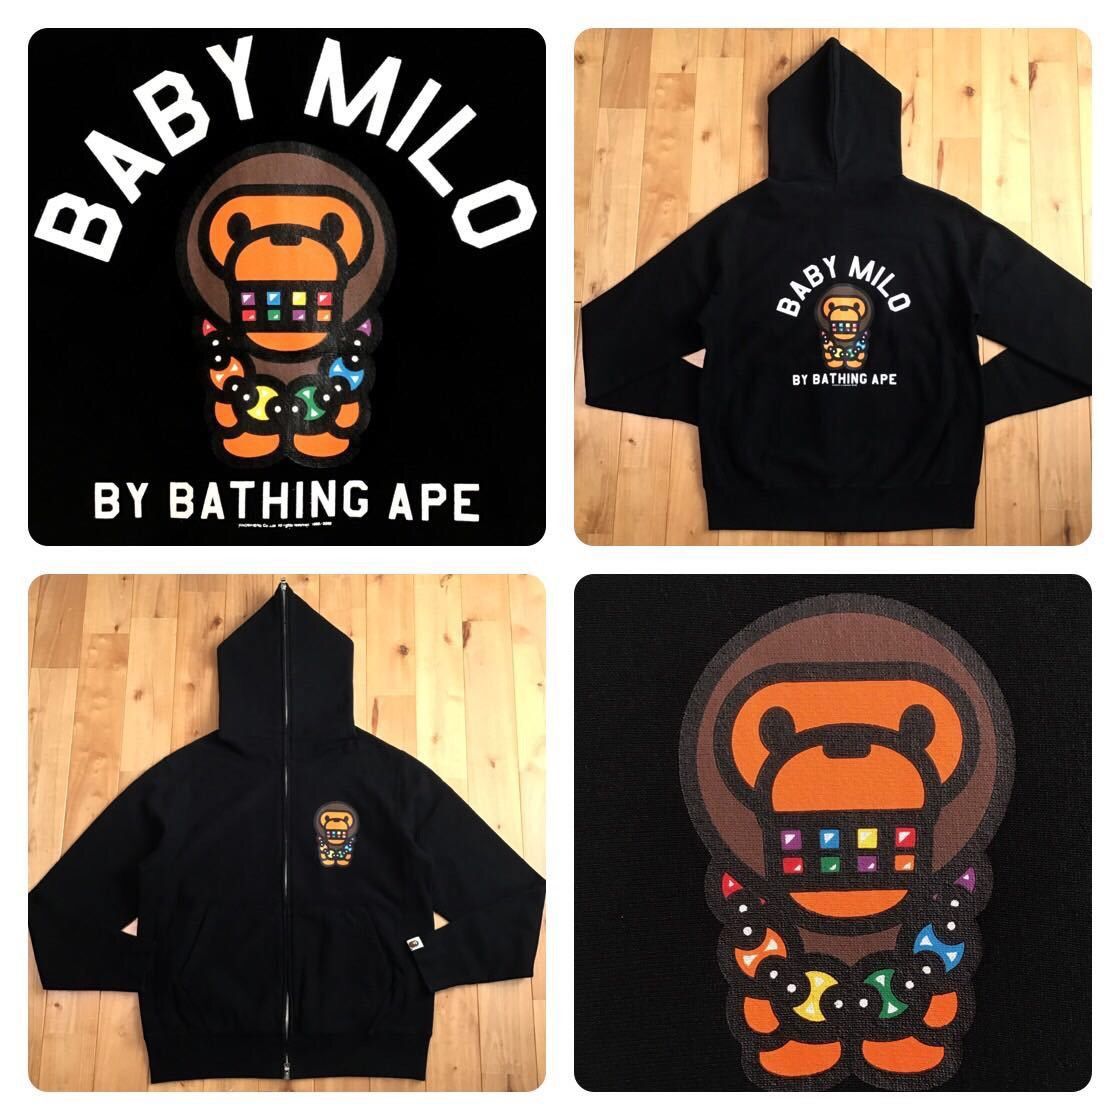 BAPE Smooth Logo Relaxed Fit Hoodie Black